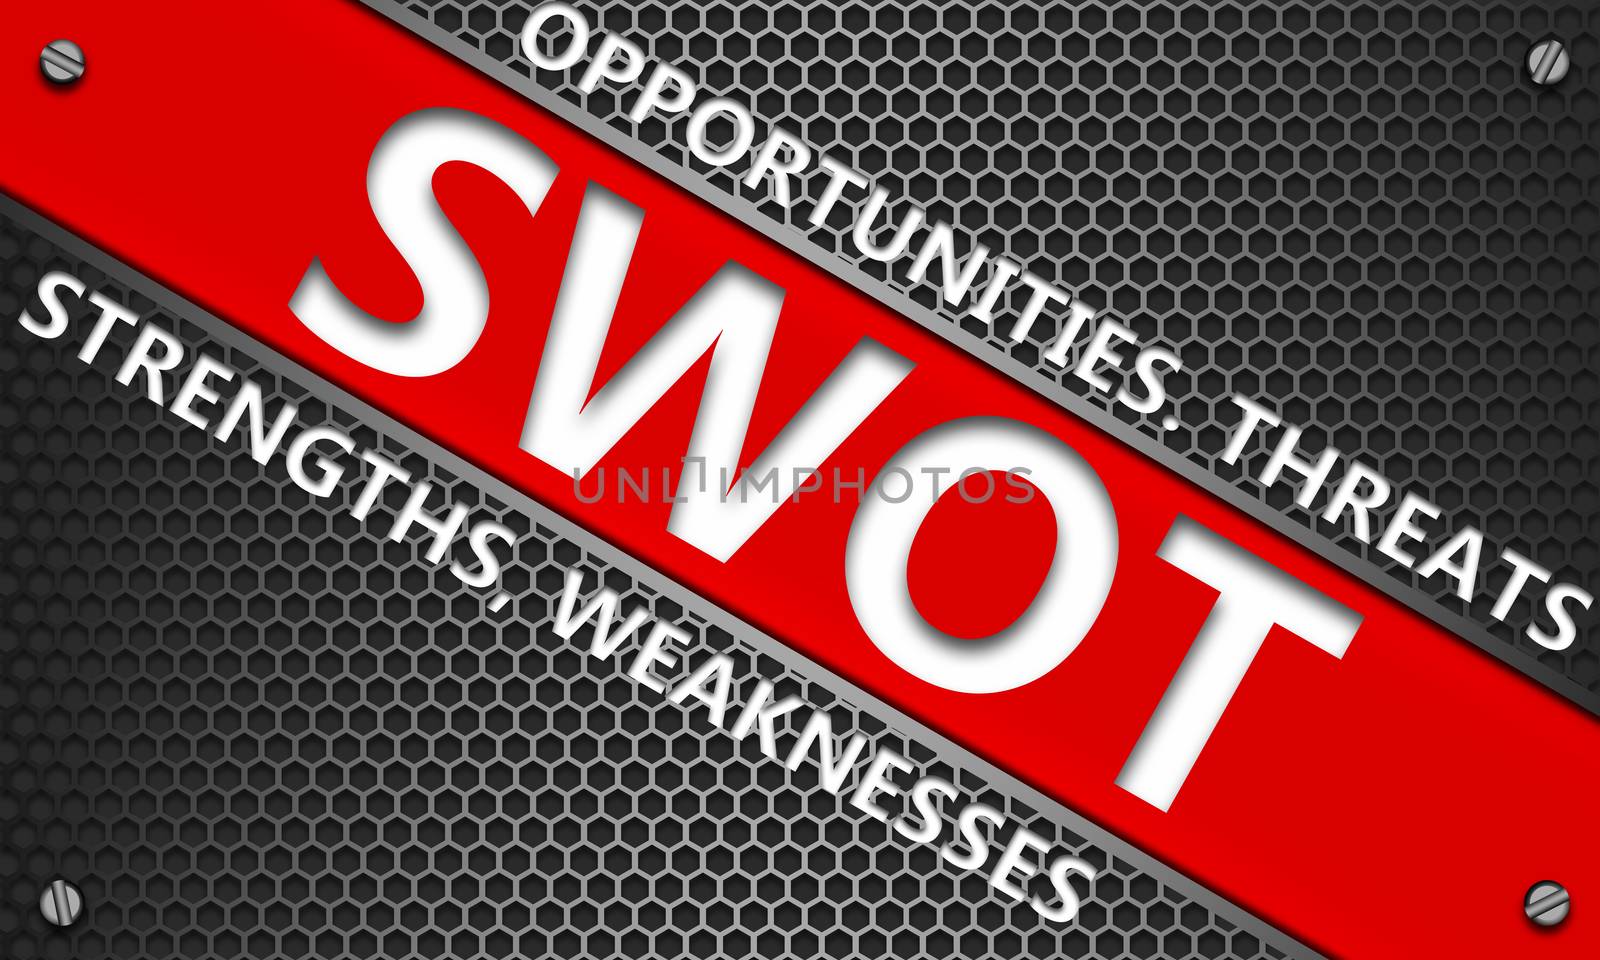 SWOT analysis business strategy concept on mesh hexagon backgrou by tang90246